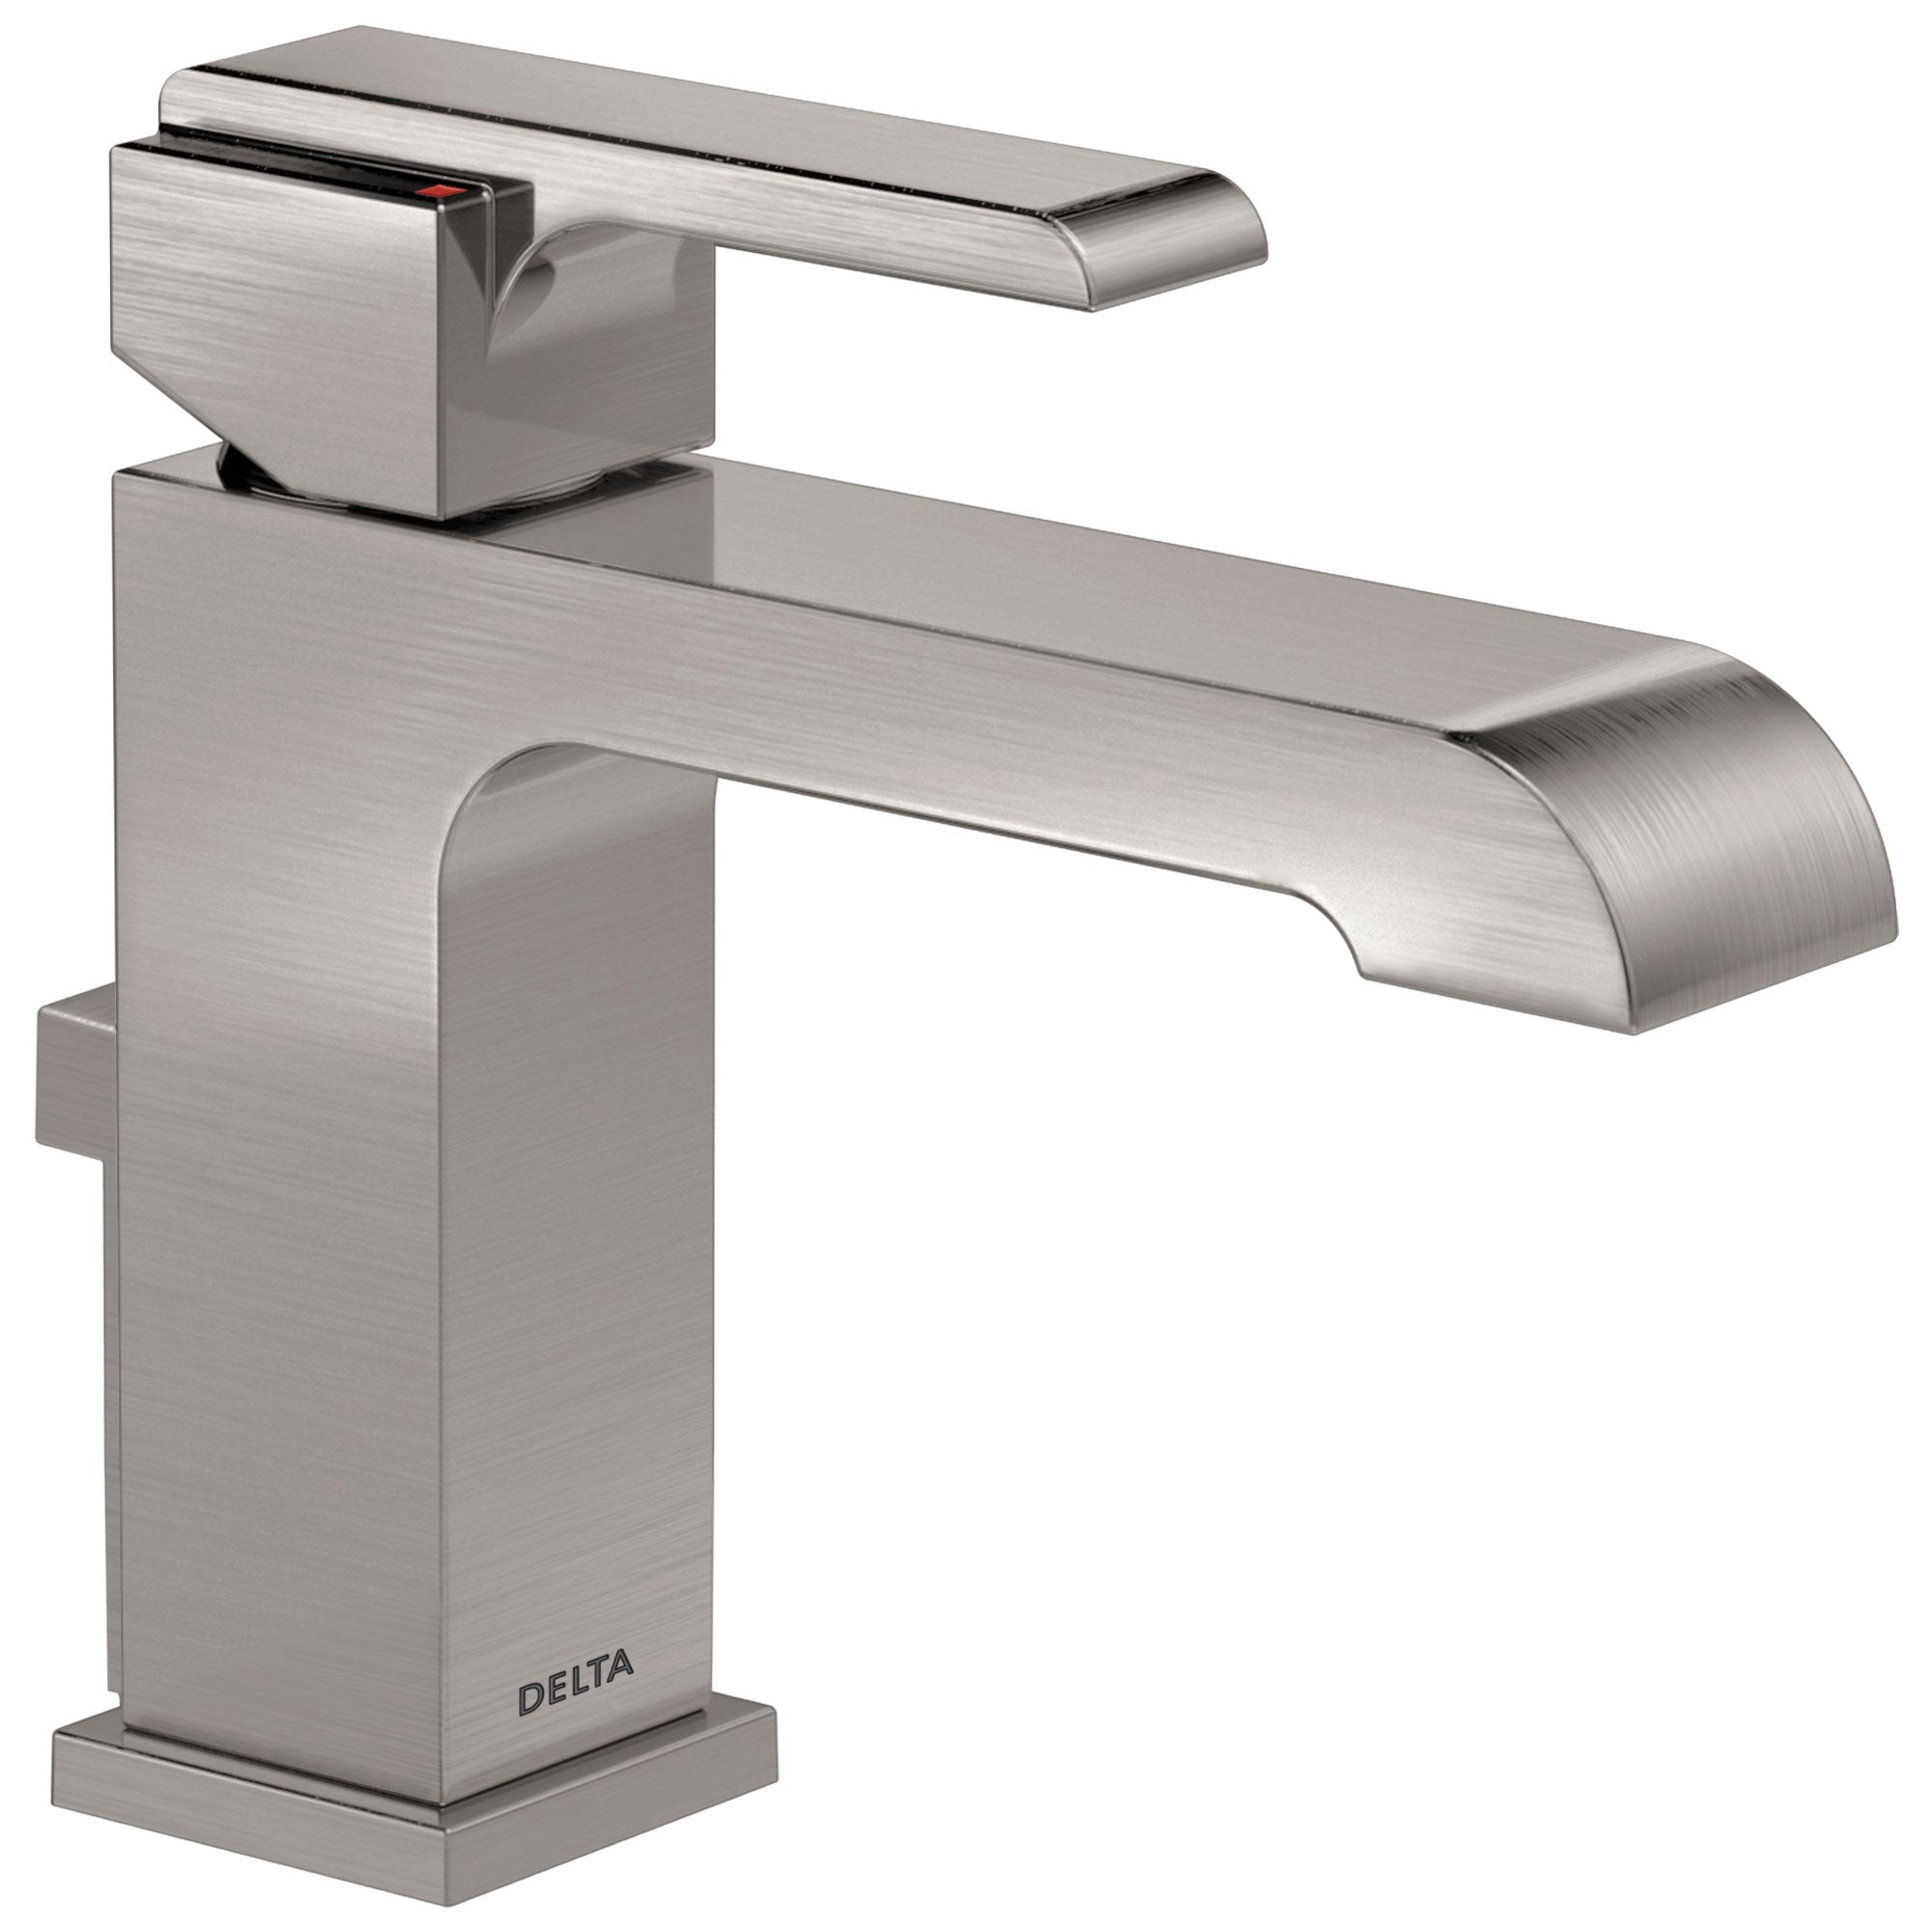 Delta Ara Collection Stainless Steel Finish Single Handle Bathroom Lavatory Sink Faucet with Metal Pop-Up Drain D567LFSSMPU